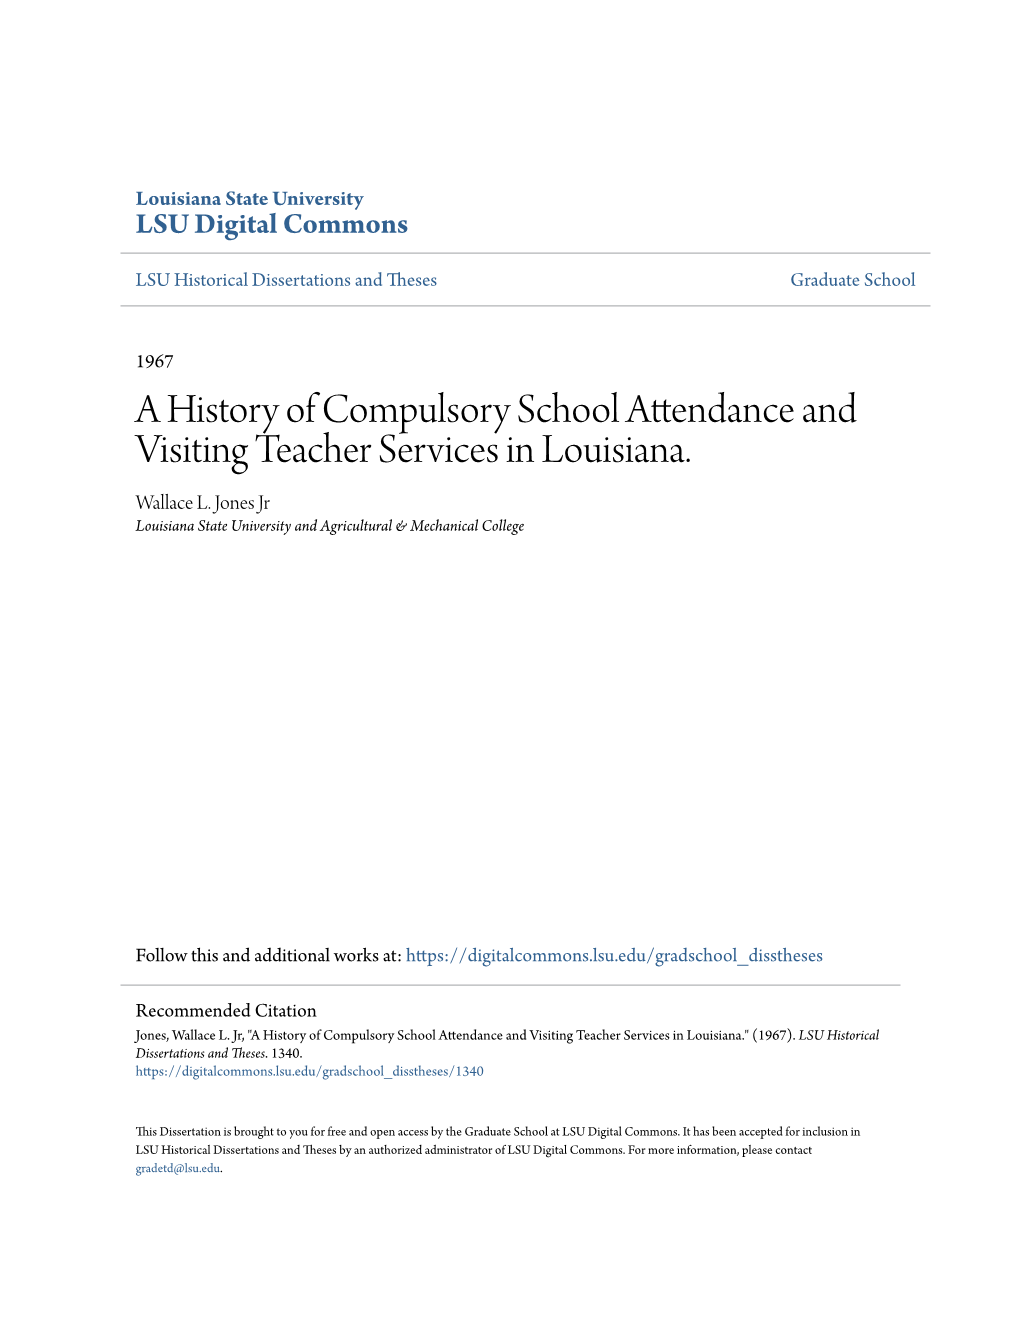 A History of Compulsory School Attendance and Visiting Teacher Services in Louisiana